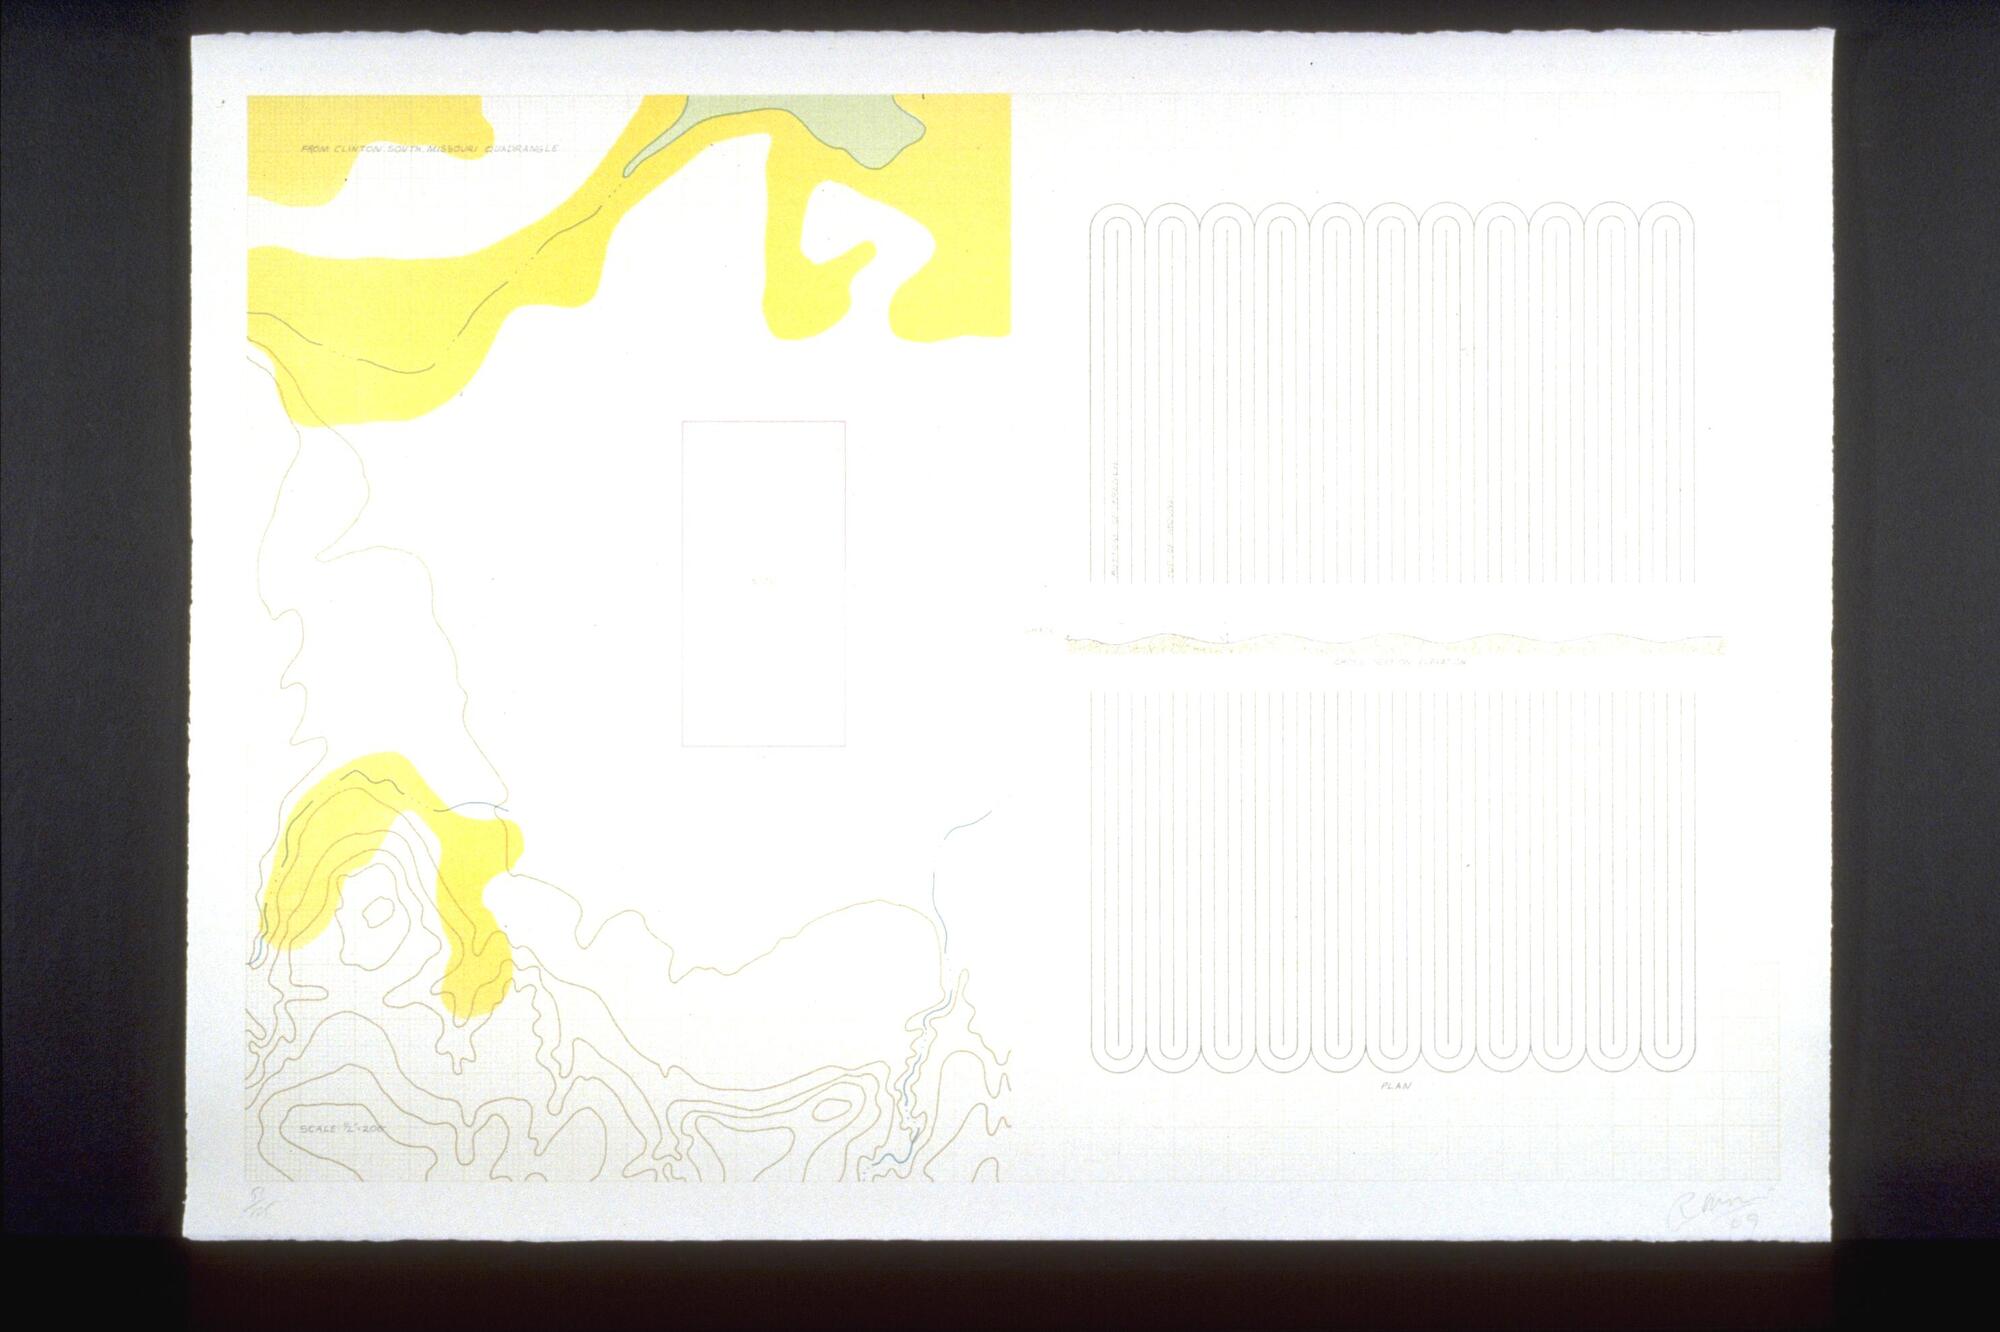 This lithograph on white wove paper is horizontally oriented with a grid of light gray lines on a white background.  On the right side there are two forms, one above the other, with closely spaced vertical gray lines. In the space between these forms is a yellow wavy shape. On the left side there is a contour map with yellow and green coloring. There is also a vertical rectangle drawn in this area and small words and numbers are drawn throughout the work.<br />